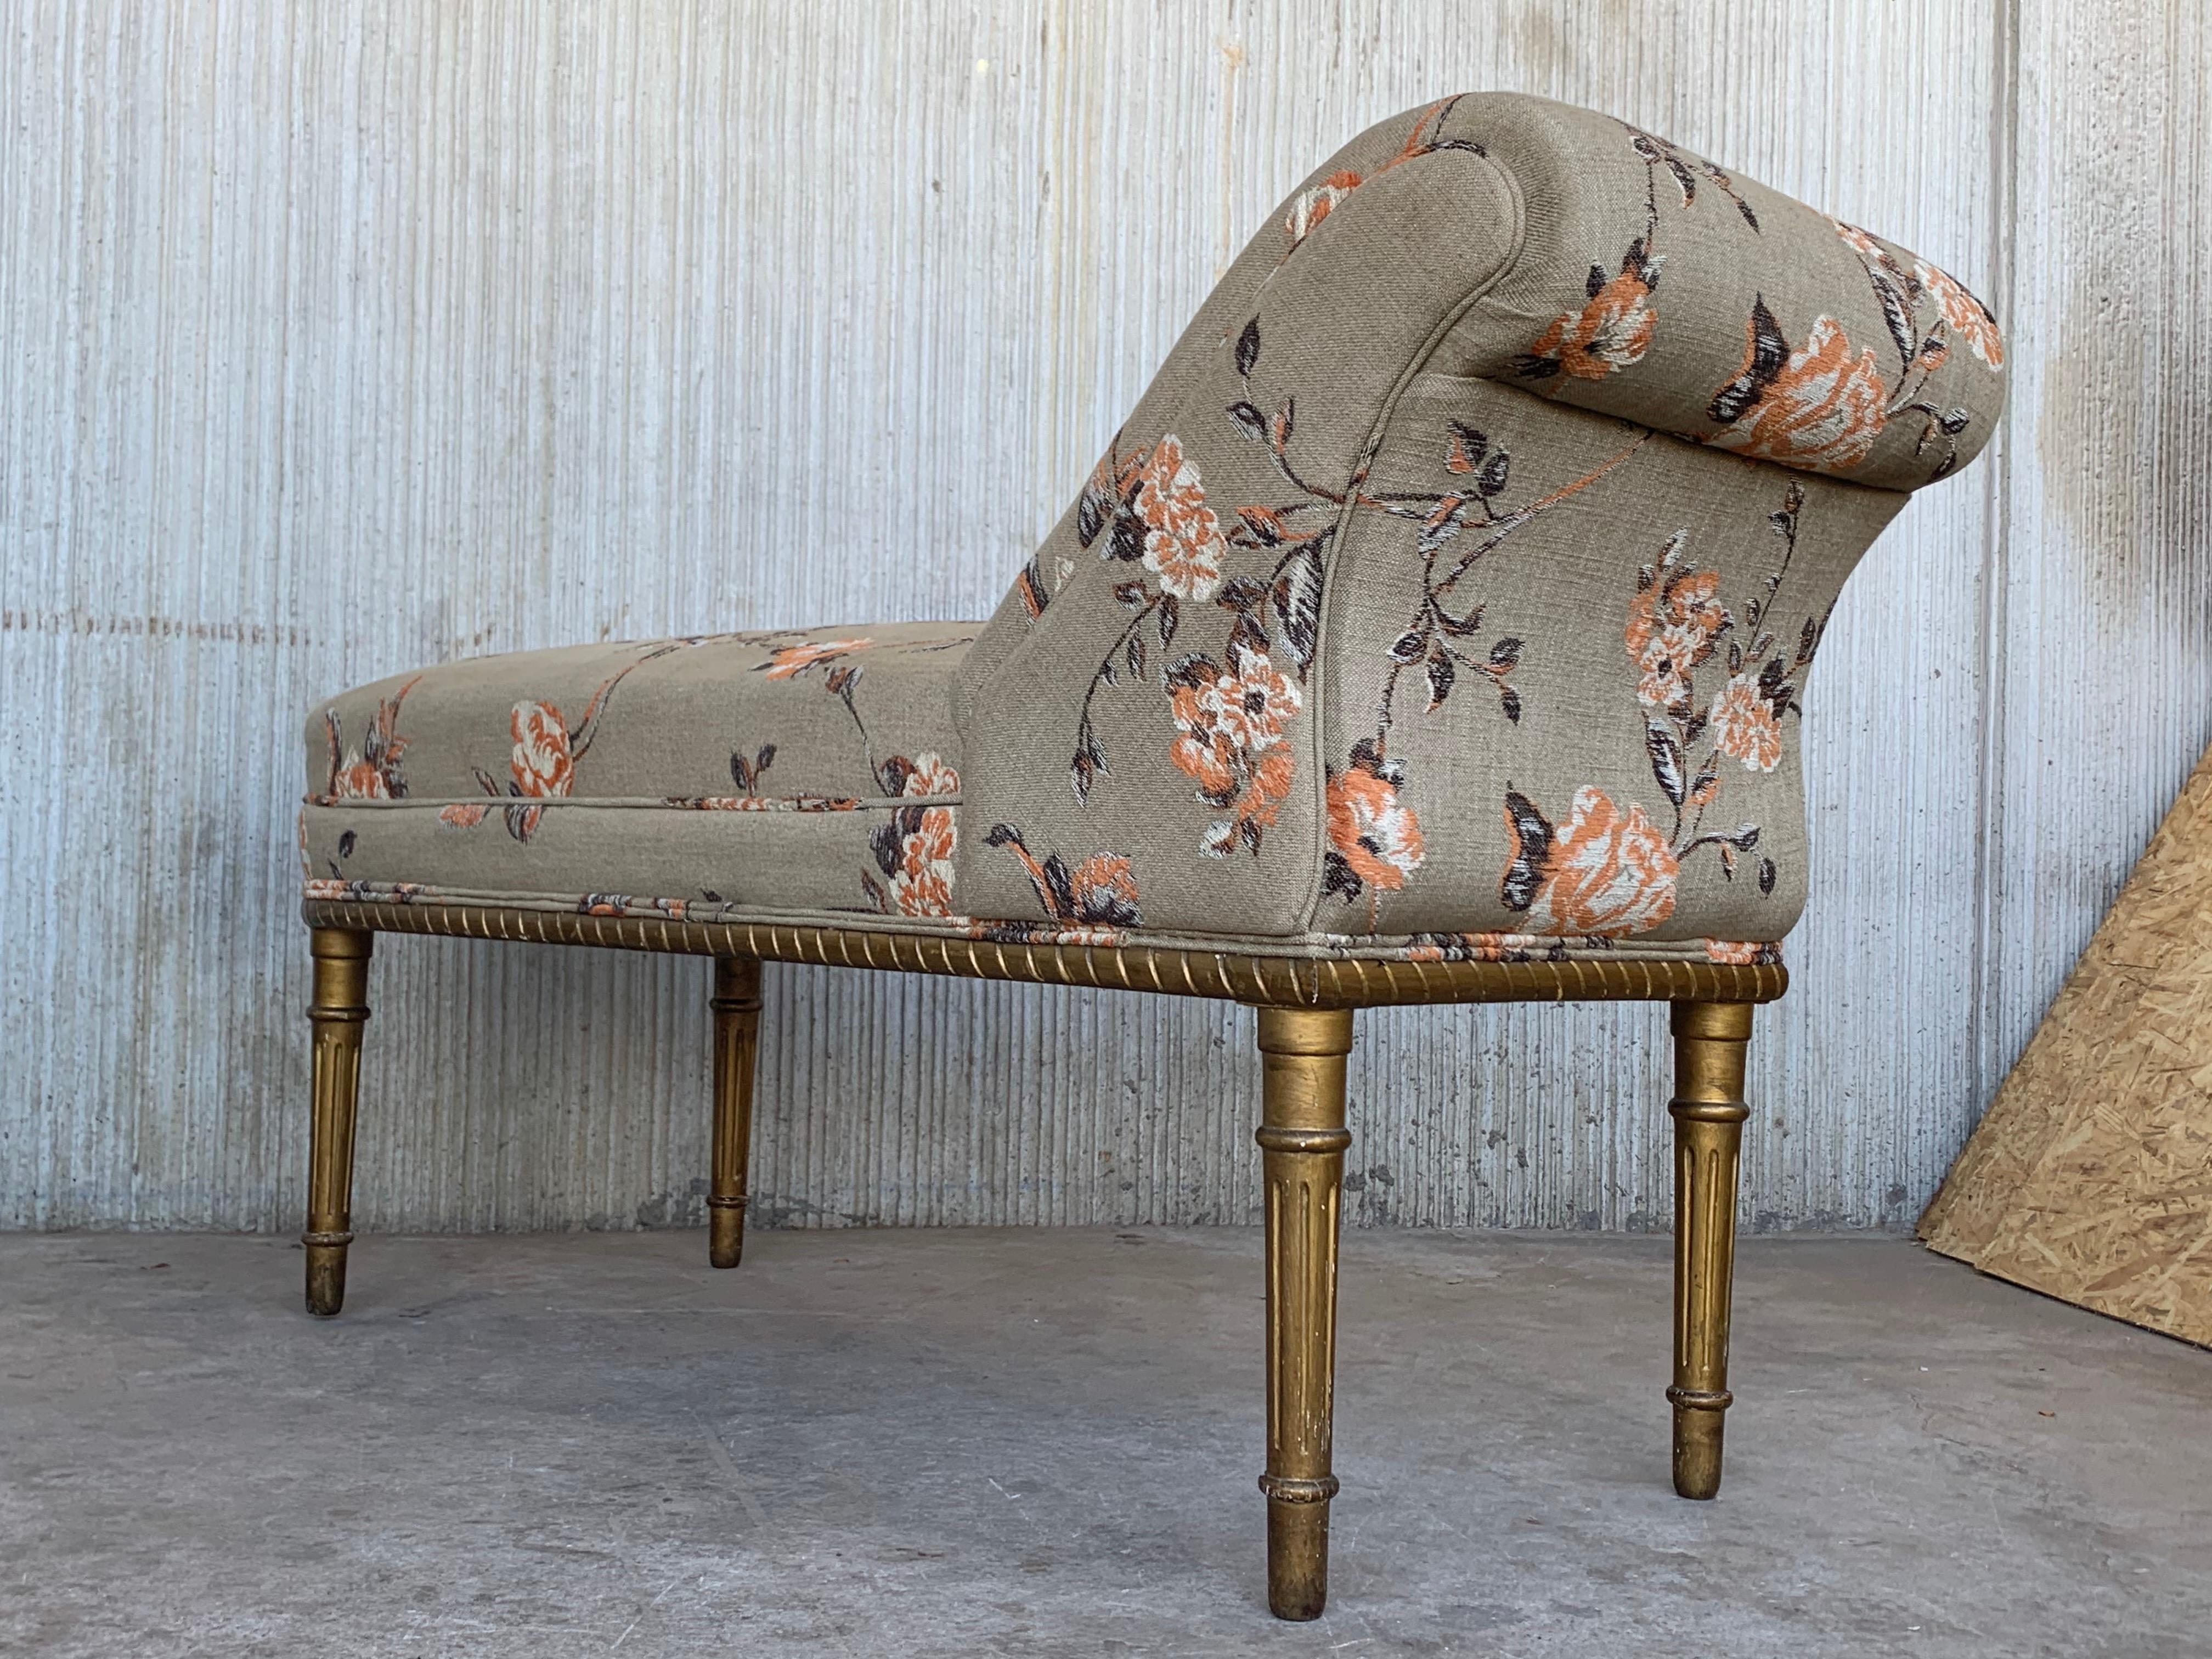 A fine example of a Regency mahogany recamier, nicely carved gilted and fluted legs, and refreshed with grey, pink-peach and black upholstery. English, circa 1820, in very good to excellent overall condition.